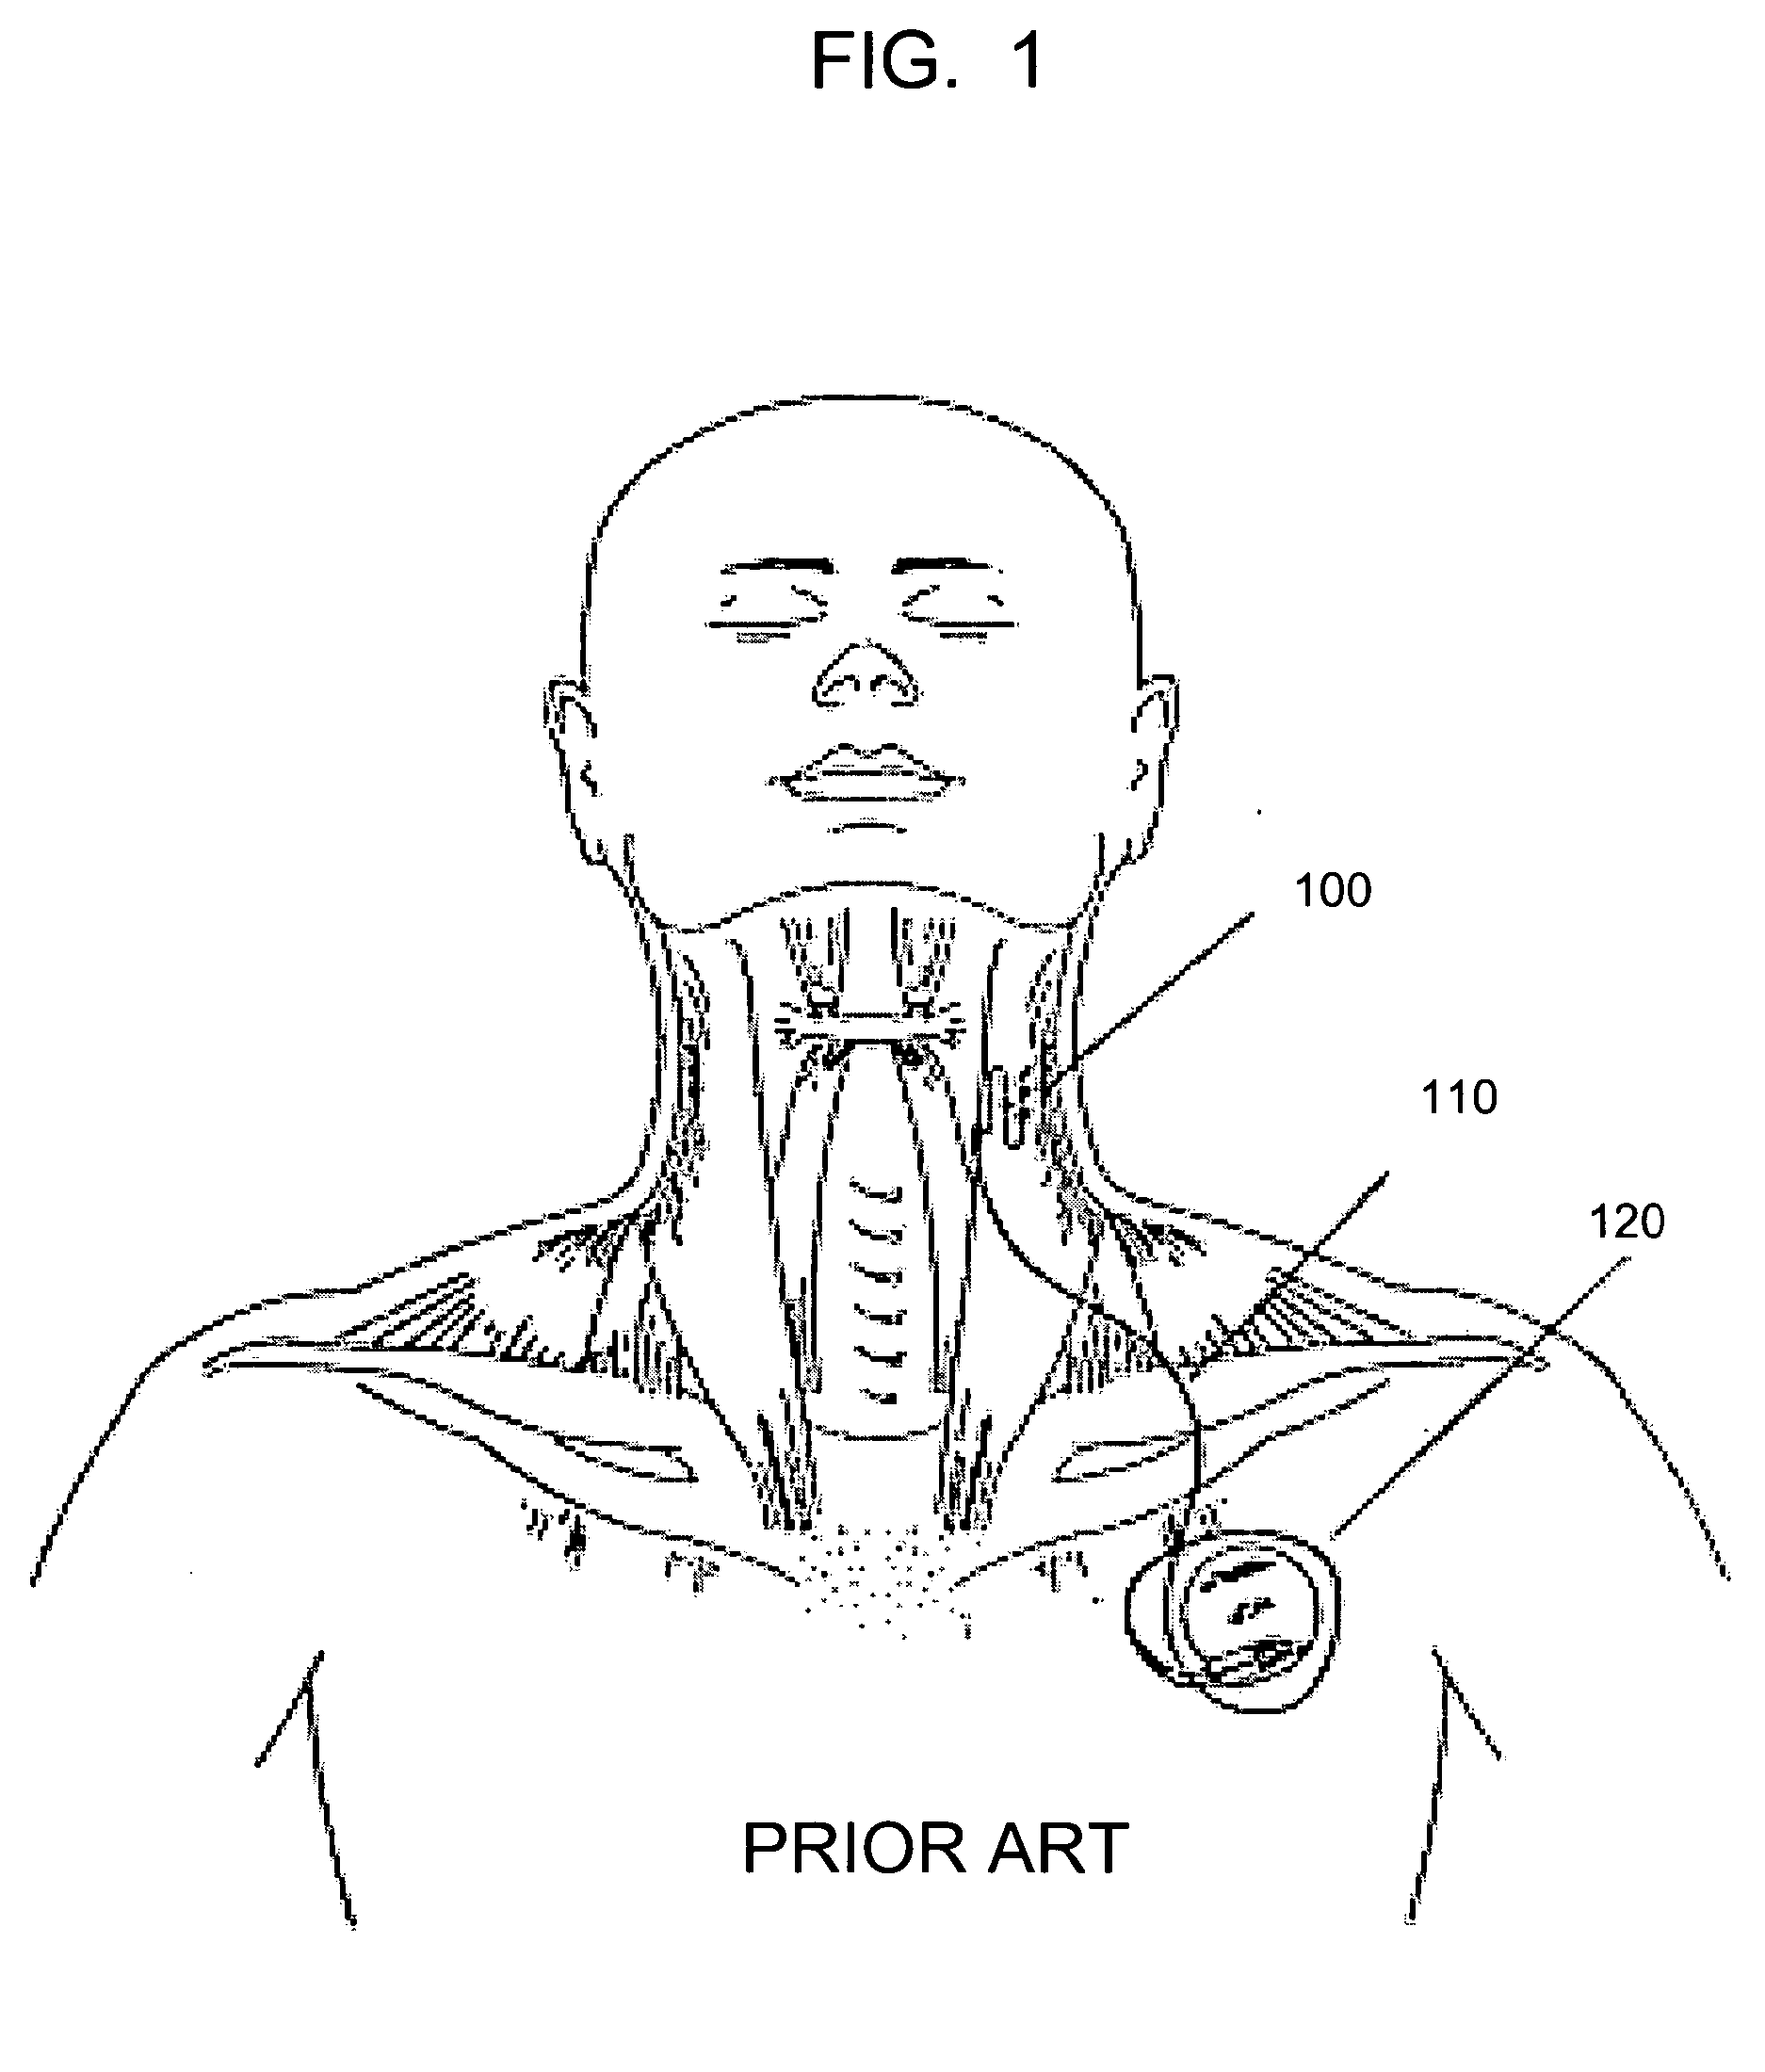 Device for neuromuscular peripheral body stimulation and electrical stimulation (ES) for wound healing using RF energy harvesting